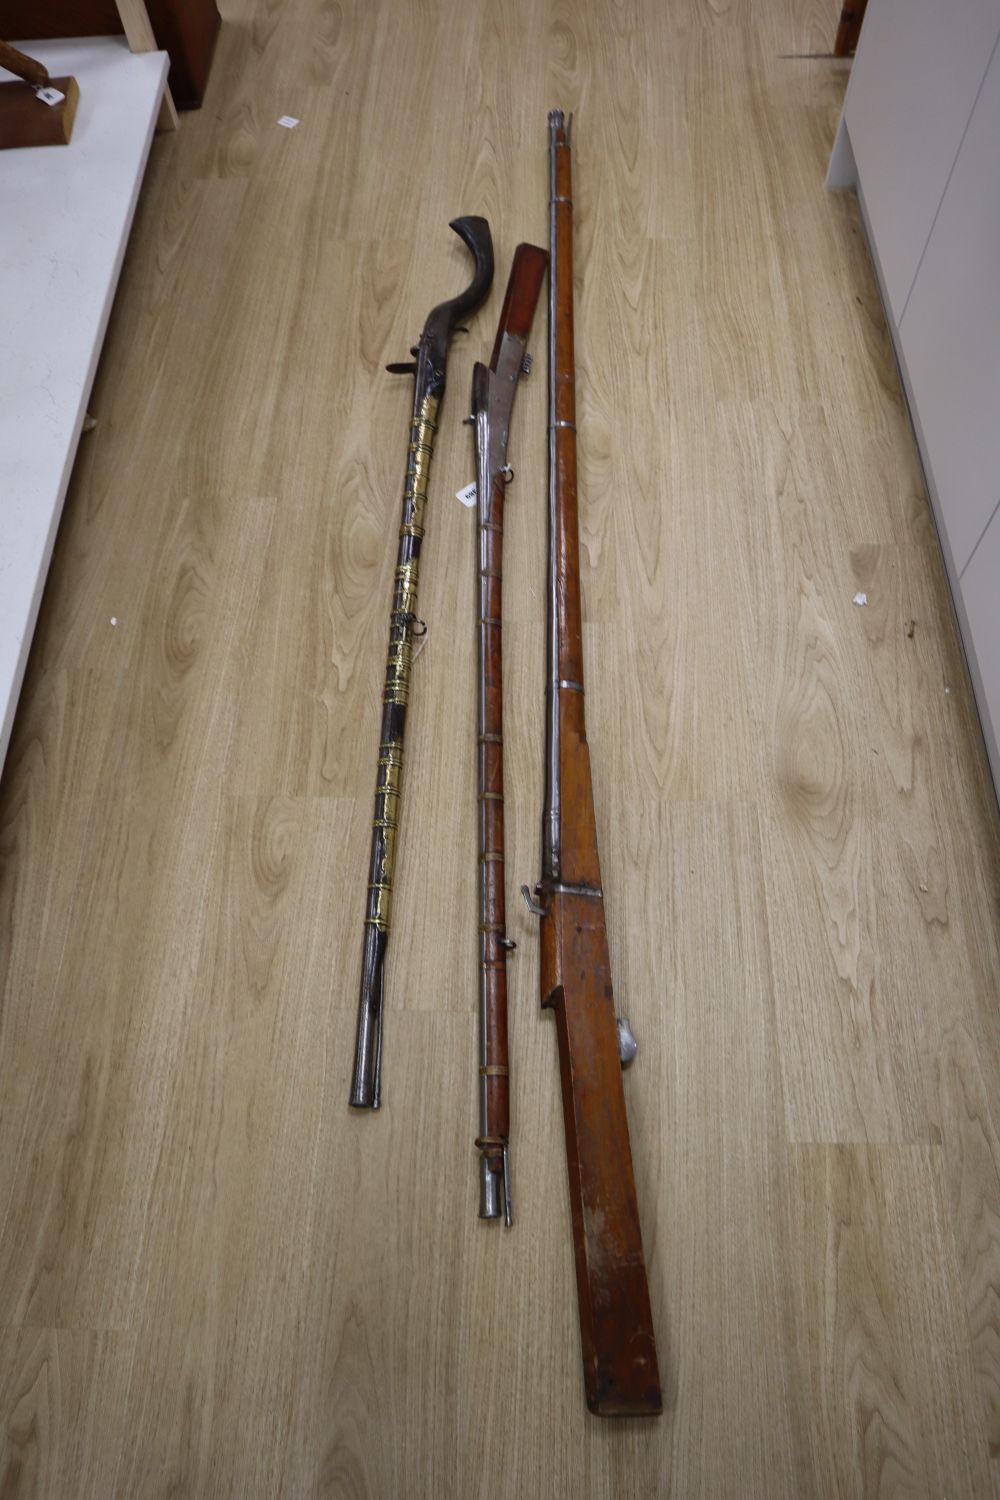 A long musket, overall 90 inches and two further longarms, all with ram-rods